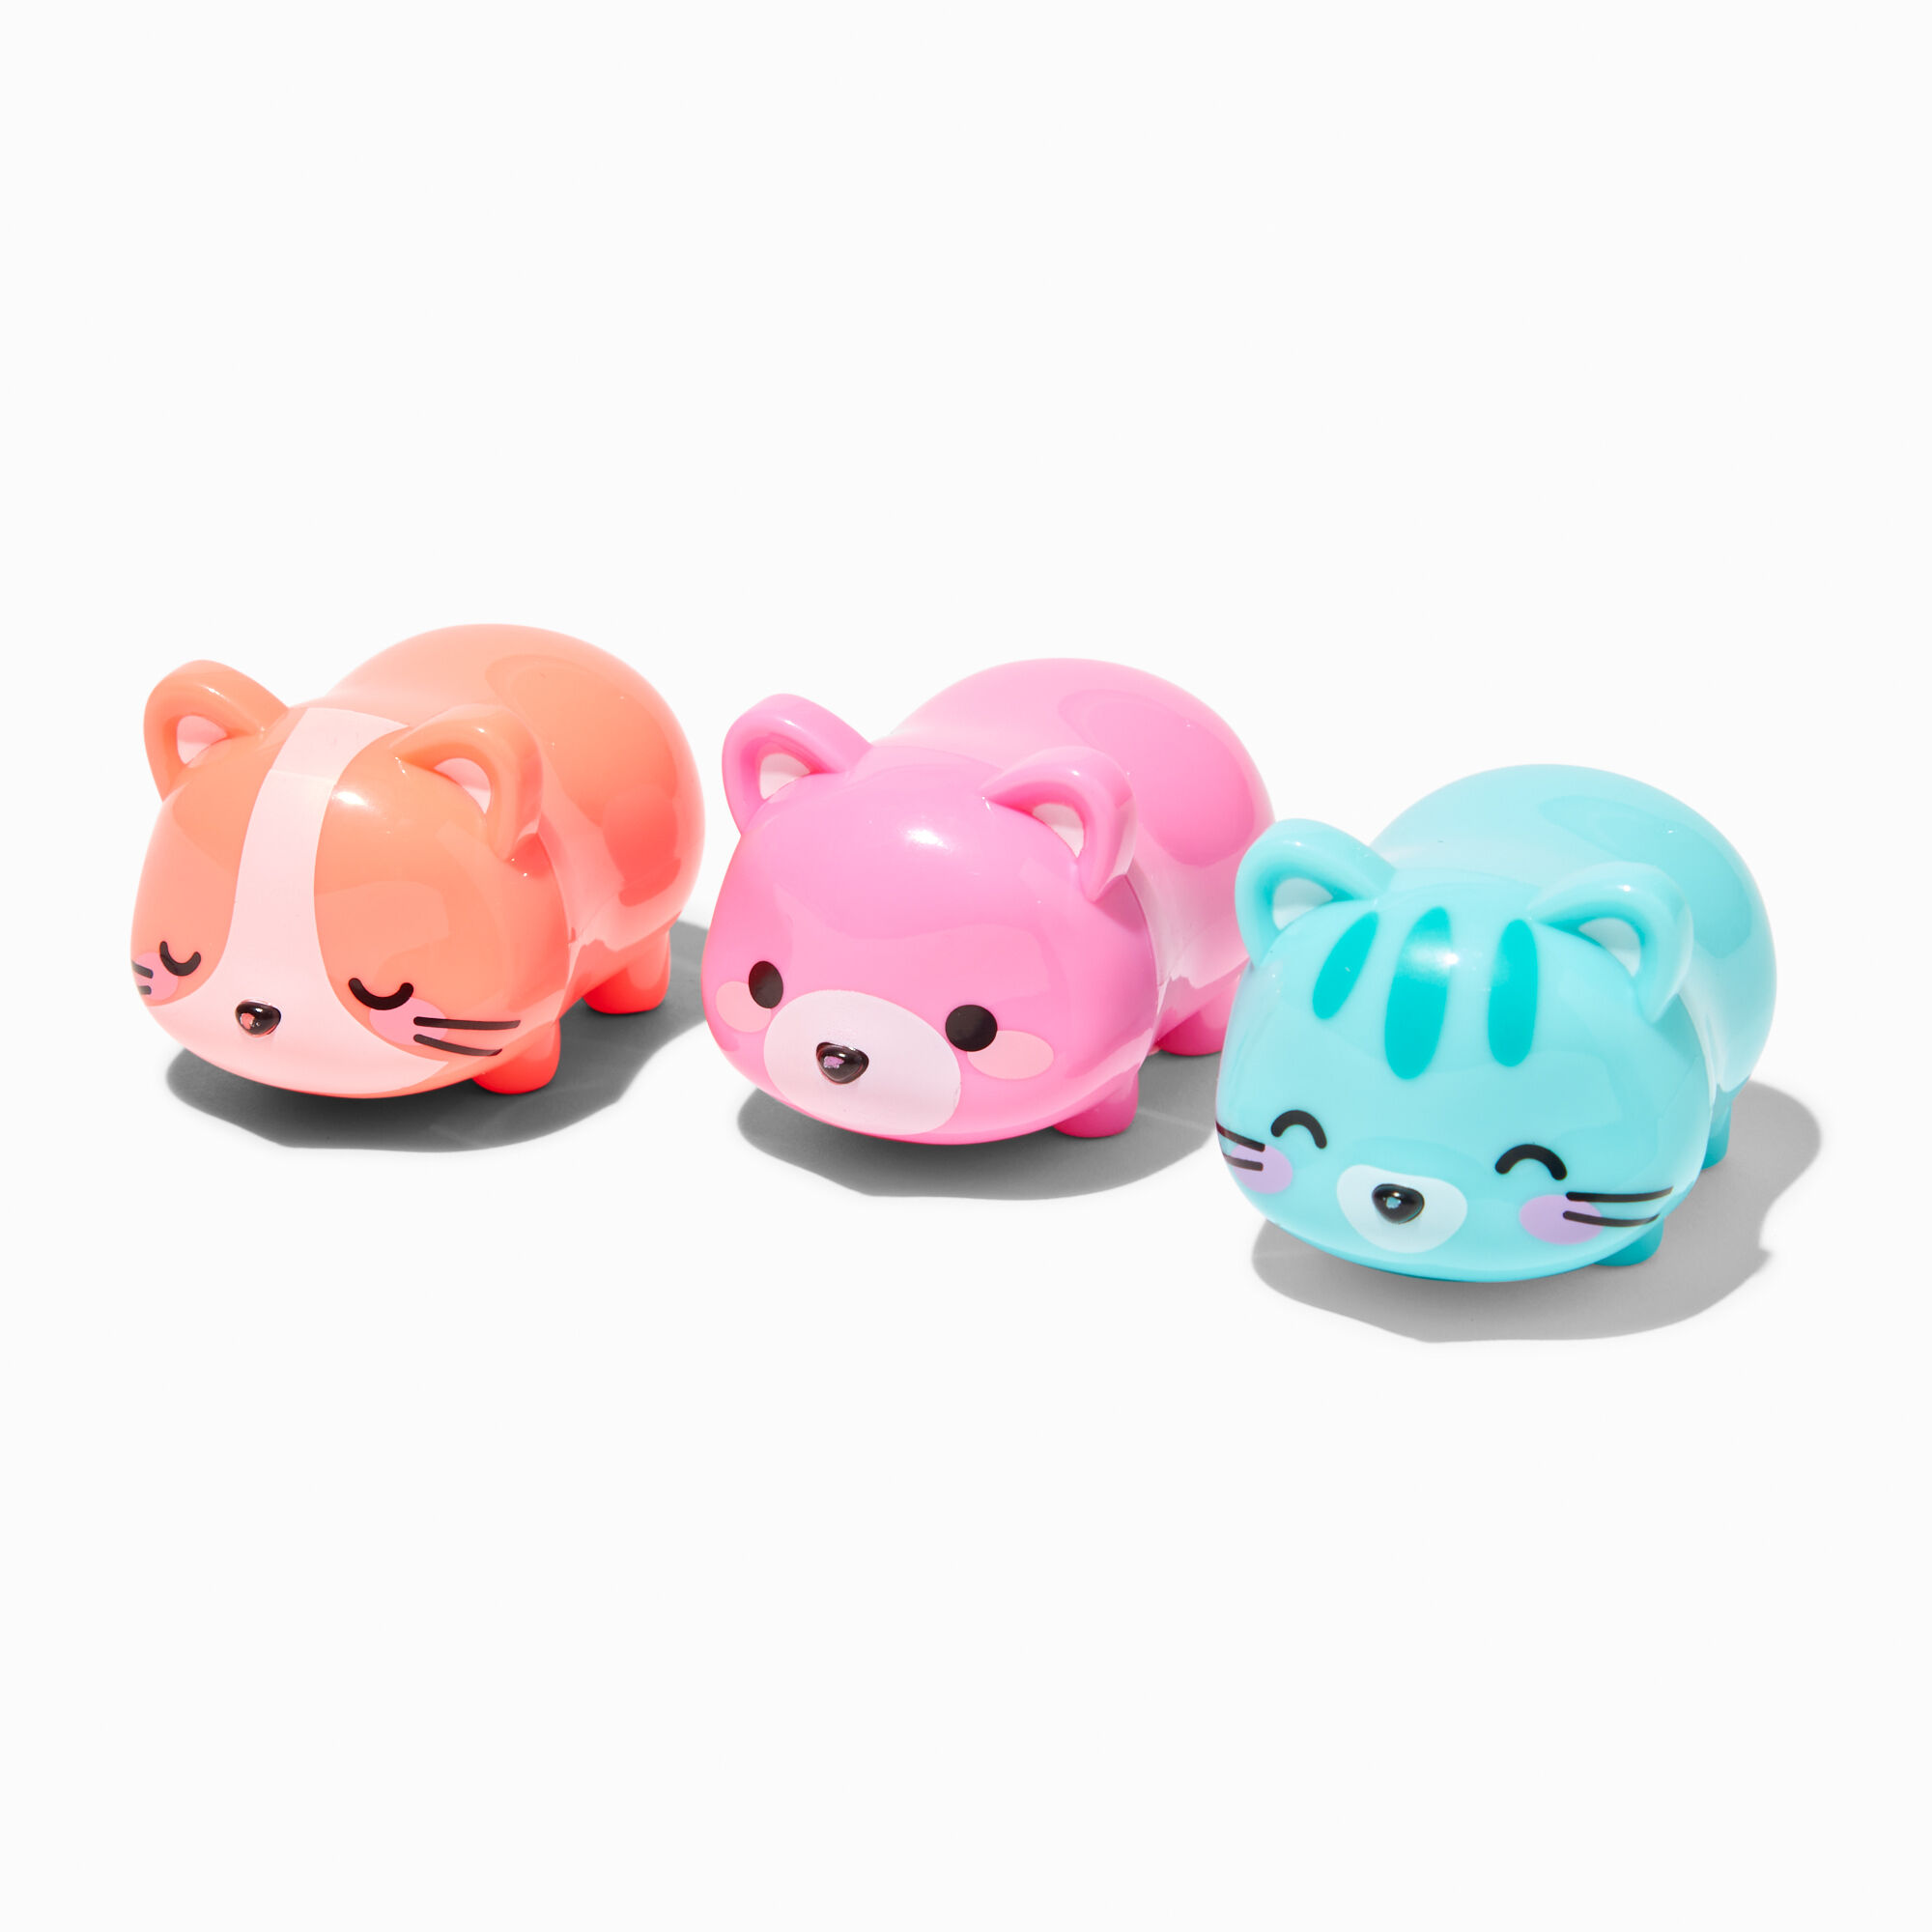 View Claires Club Critters Parade Lip Gloss Pot Set 3 Pack information